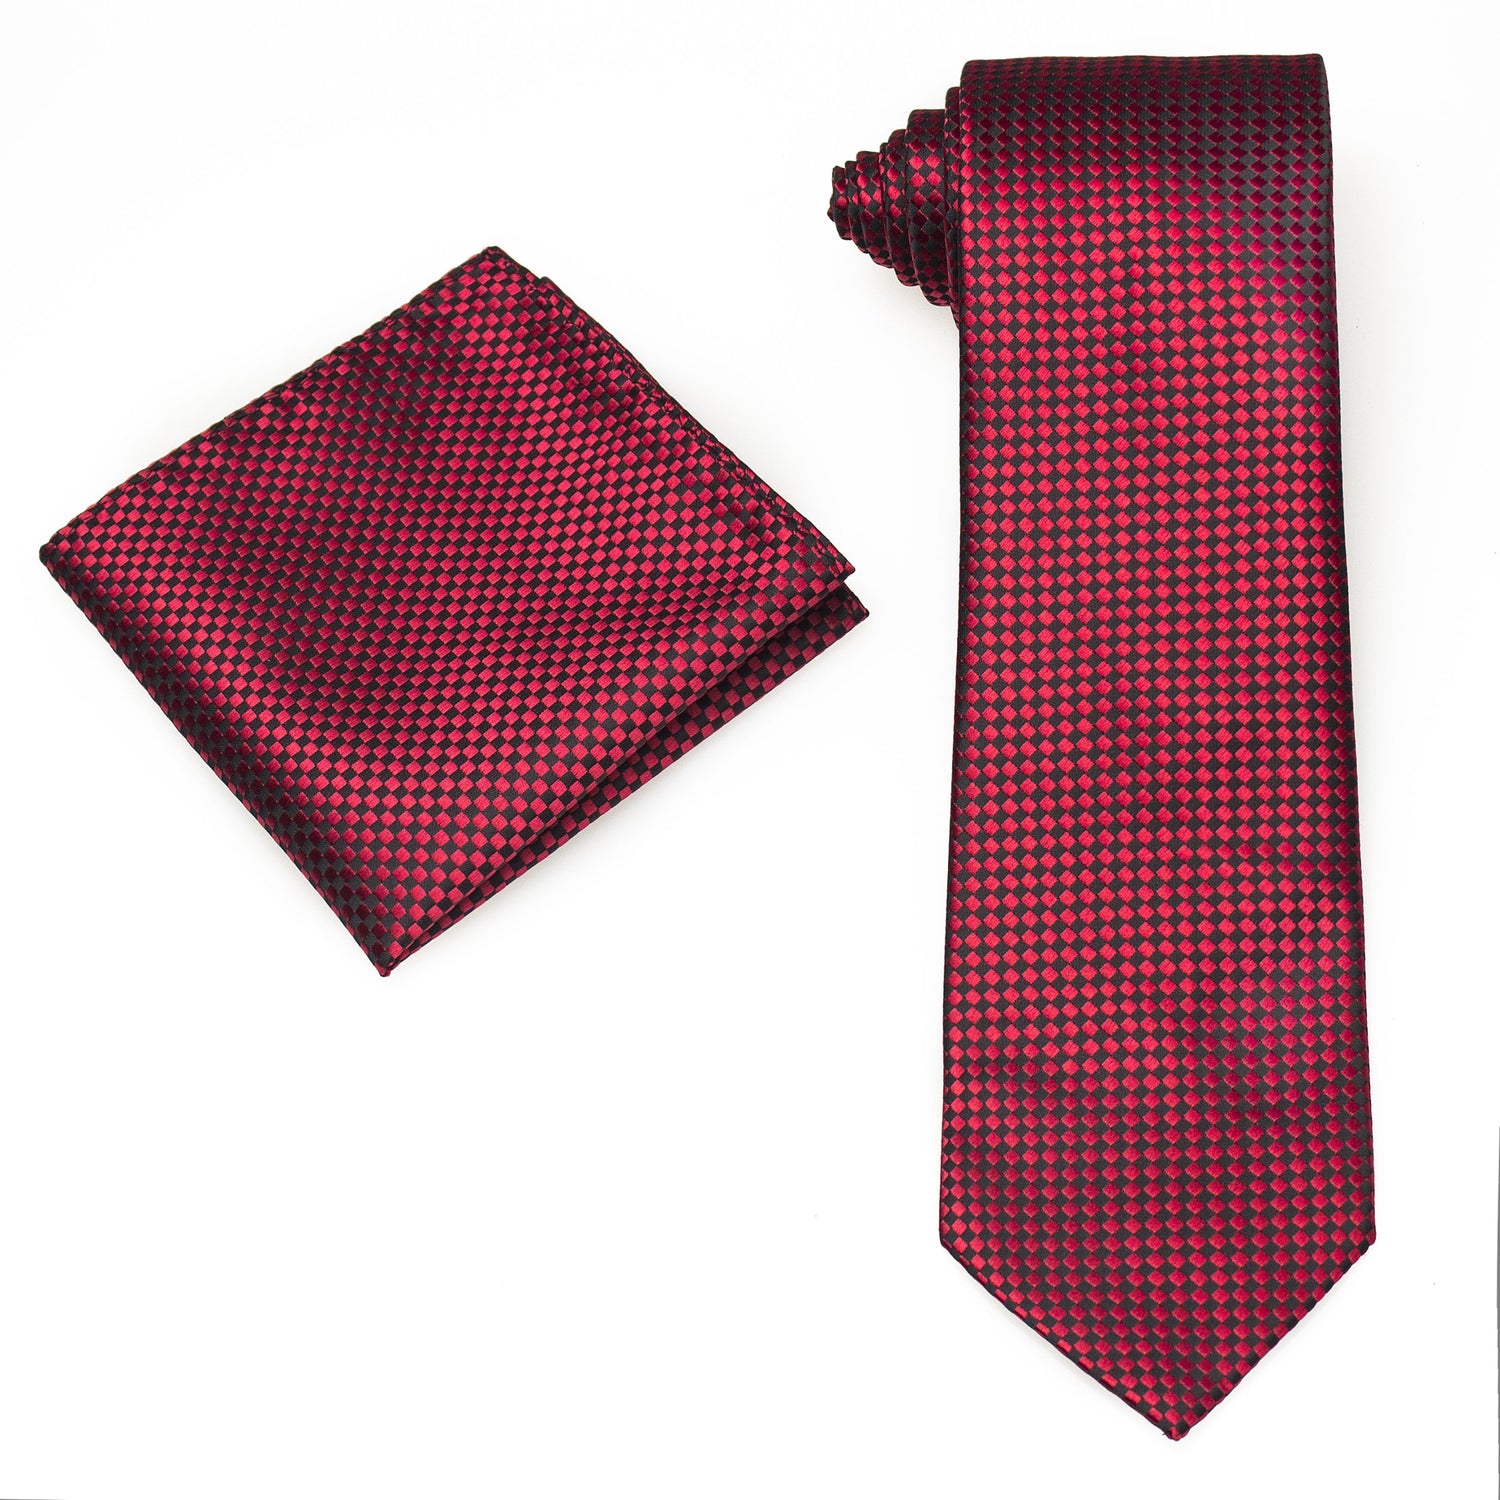 Alt View: Red, Black Check Tie and Pocket Square